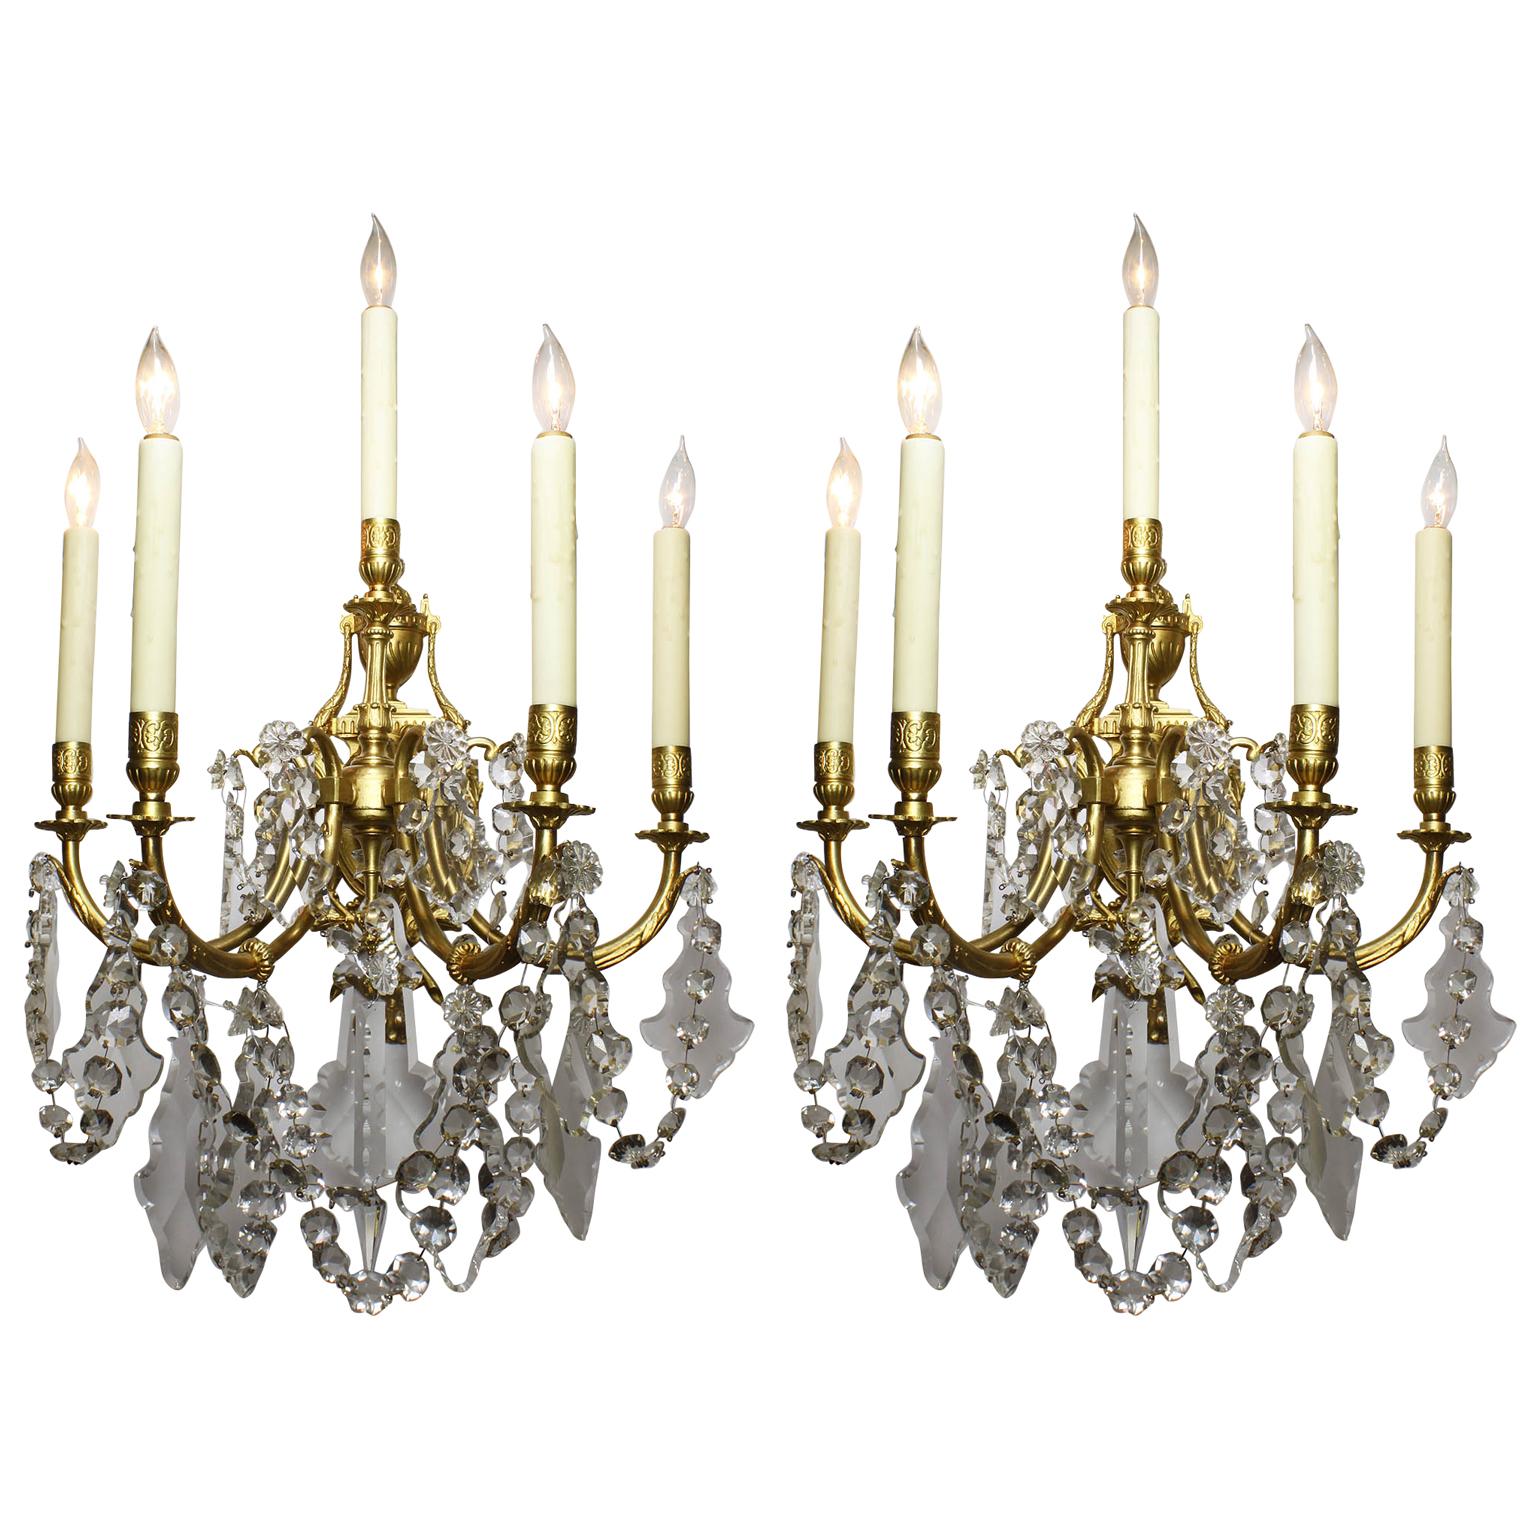 Early 20th Century Pair of French Louis XV Style Gilt-Bronze and Cut-Glass Wall Lights